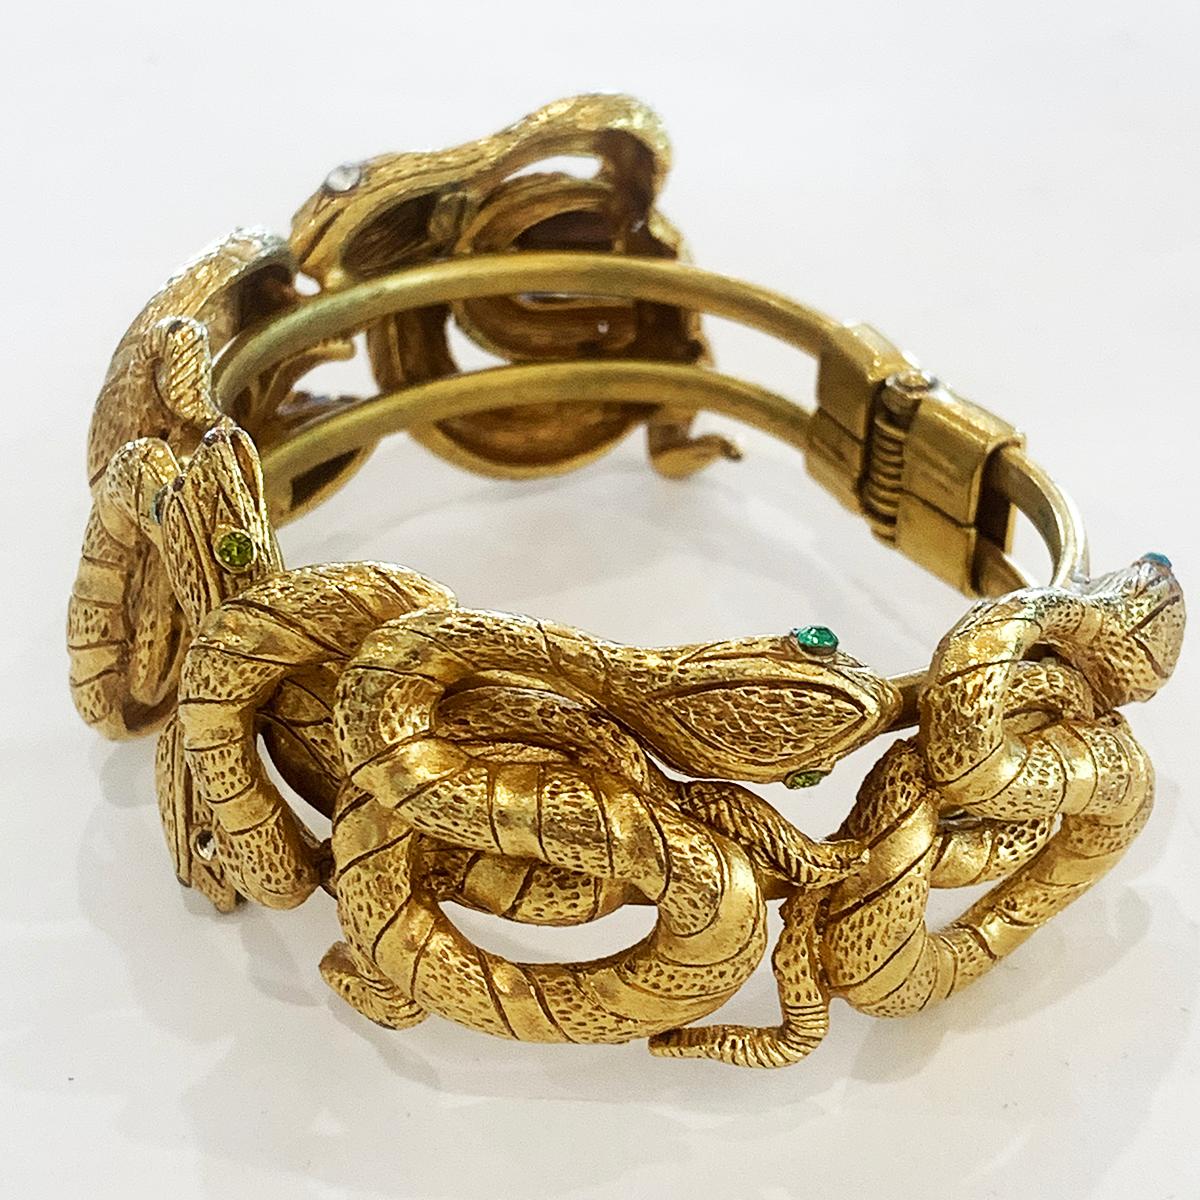 An Egyptian Revival Snake Clamper Bangle by Askew of London, with highlights of mixed Diamantes to eyes. Comprising the rich 24ct Gold finish with 6 snakes intertwined, 3 each side of the Bangle opening. The gold finish is excellent with great, rich